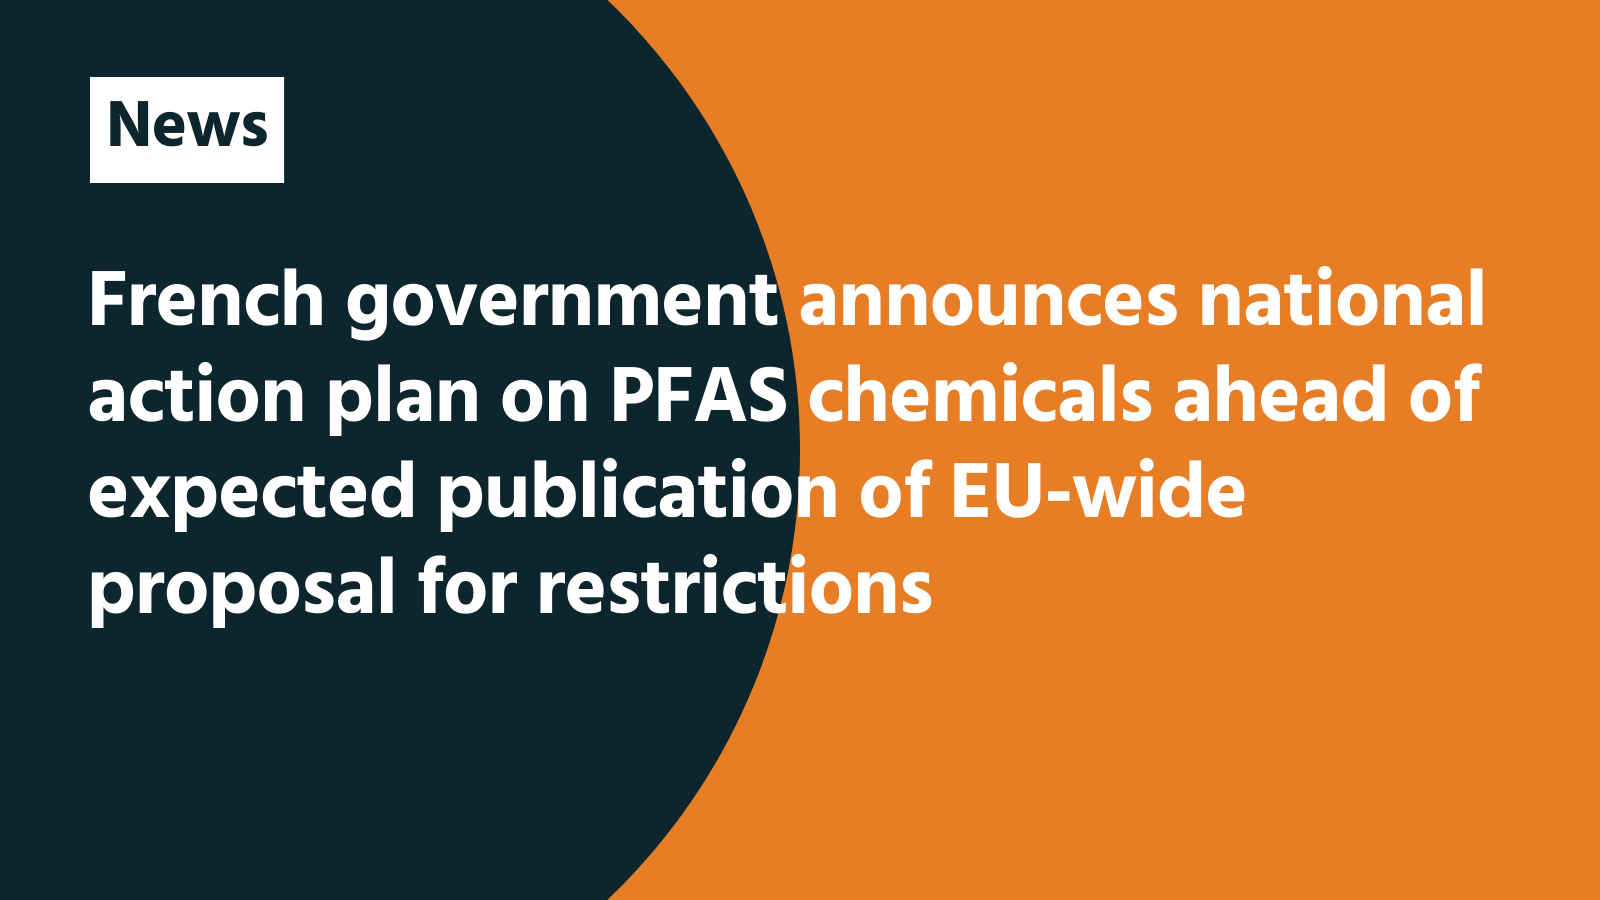 French government announces national action plan on PFAS chemicals ahead of expected publication of EU-wide proposal for restrictions